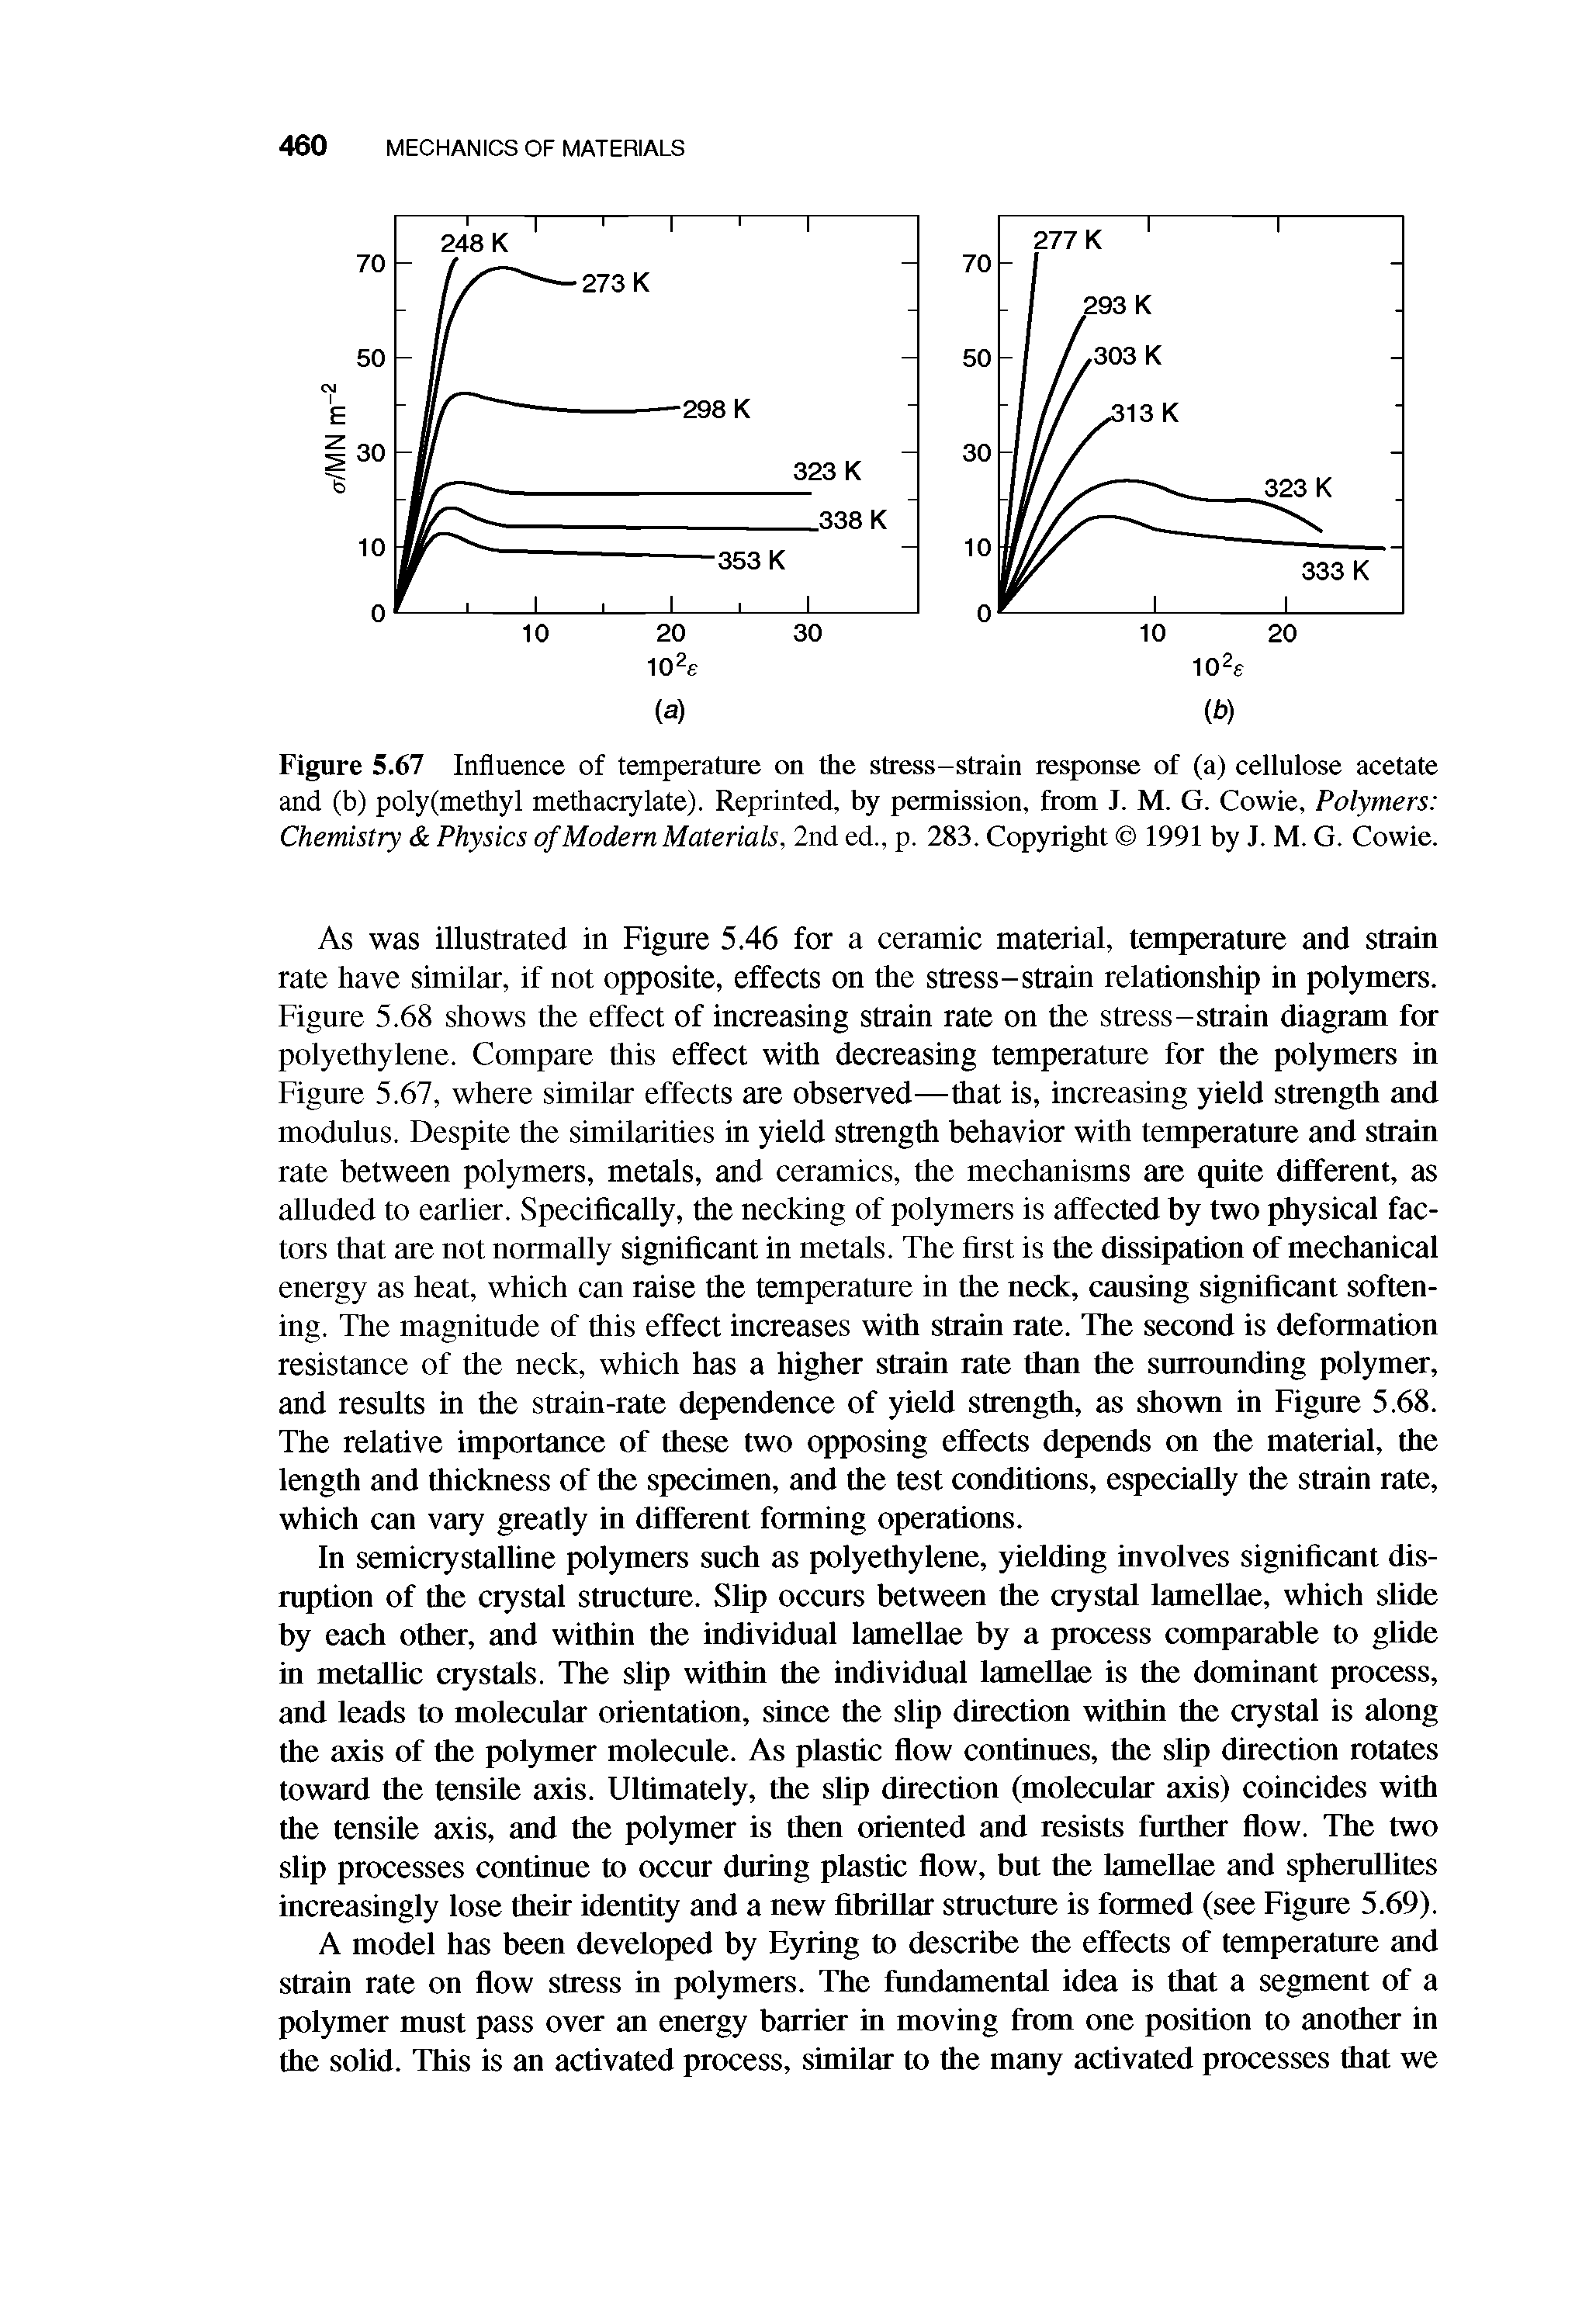 Figure 5.67 Influence of temperature on the stress-strain response of (a) cellulose acetate and (b) poly(methyl methacrylate). Reprinted, by permission, from J. M. G. Cowie, Polymers Chemistry Physics of Modem Materials, 2nd ed., p. 283. Copyright 1991 by J. M. G. Cowie.